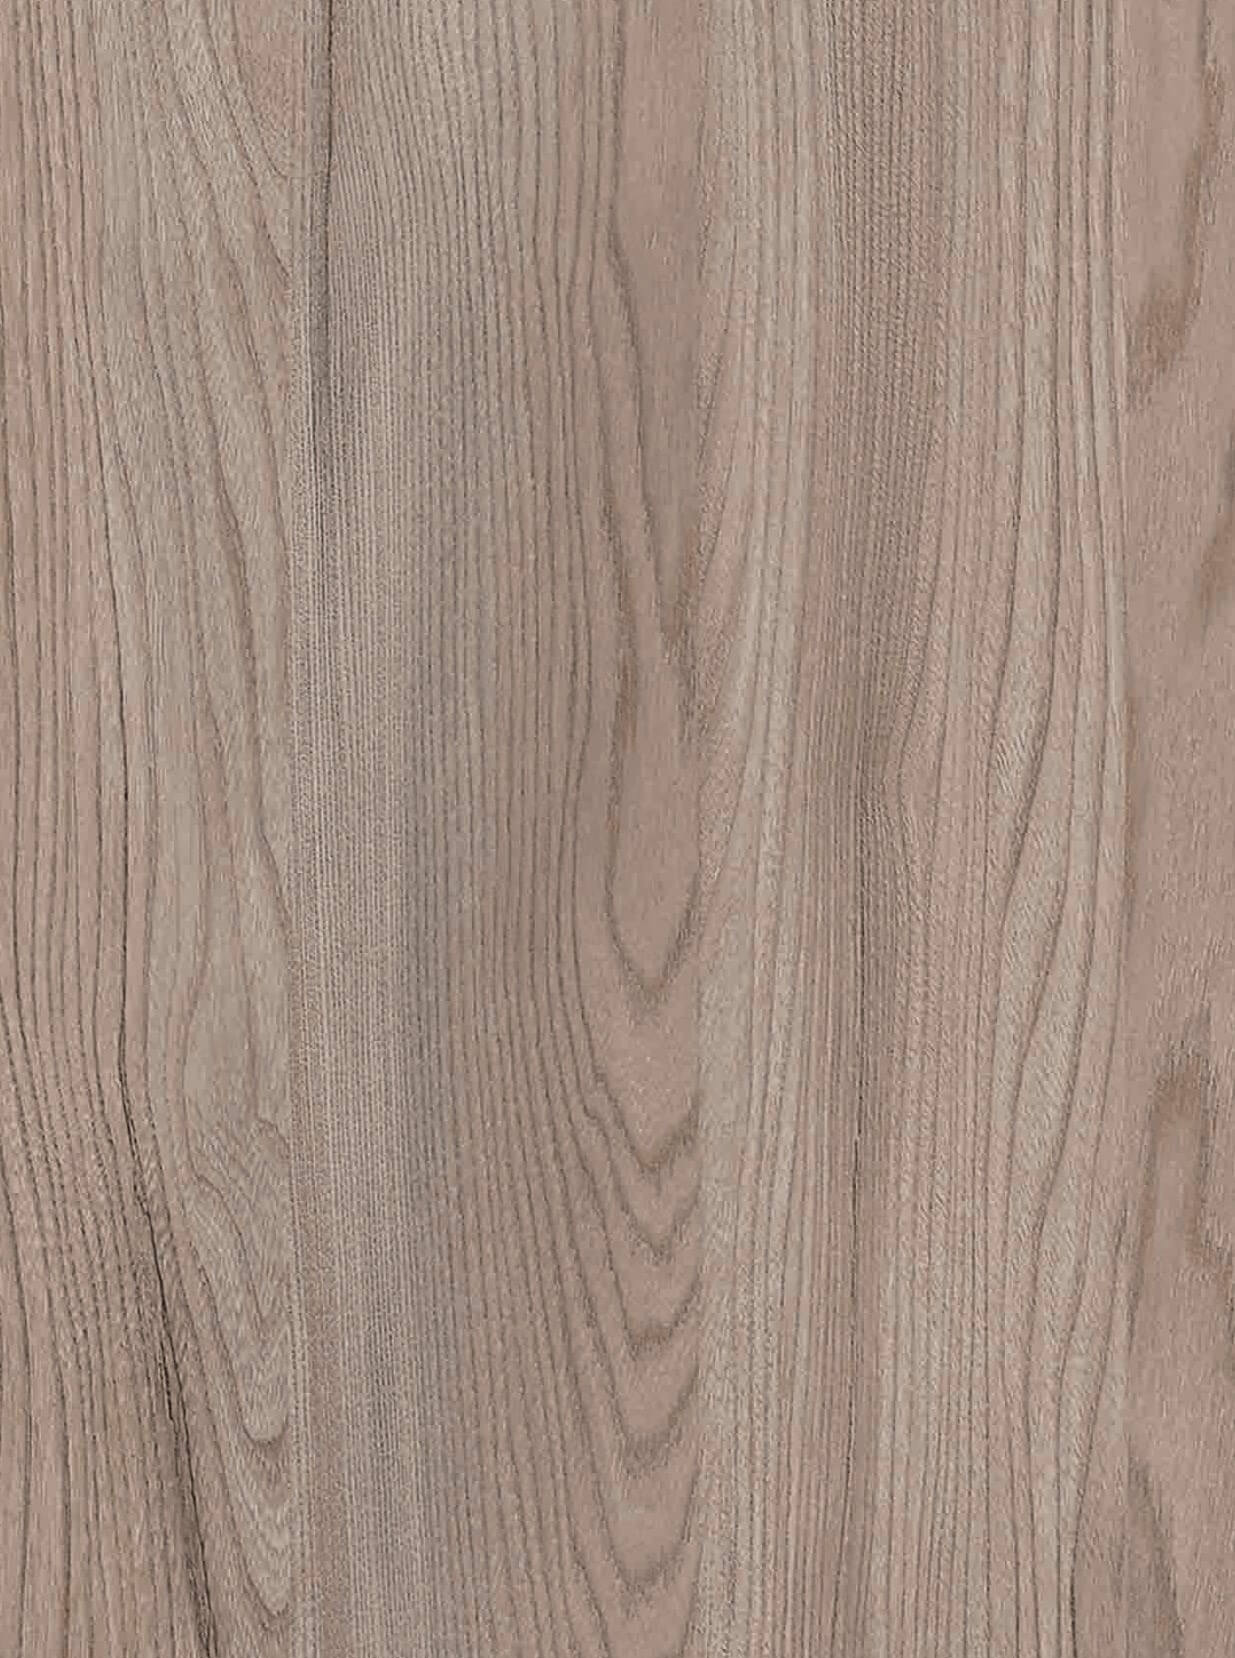 NX LAMINATE Tiles Gallery Images